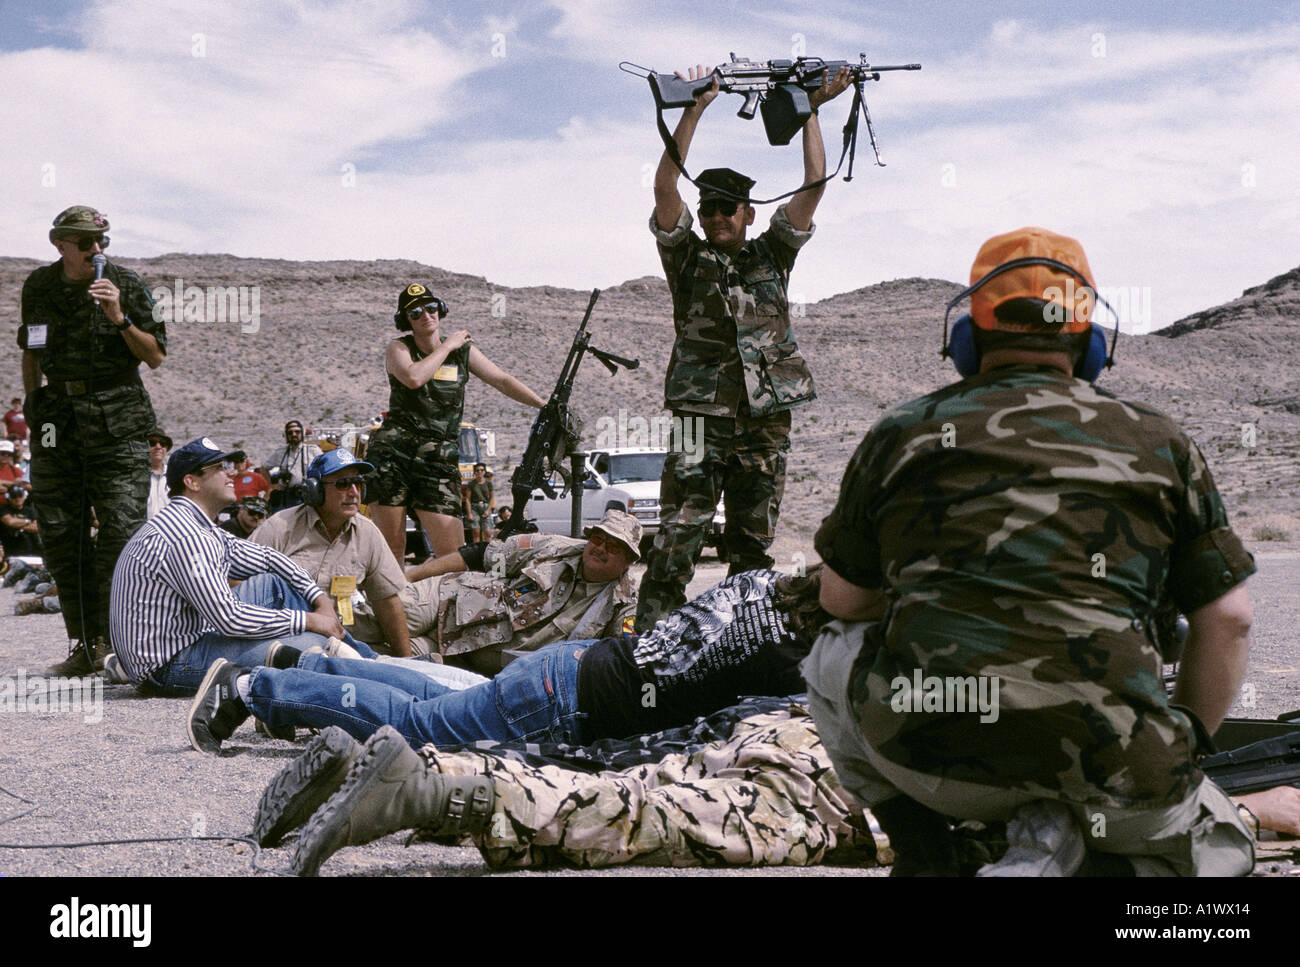 SOLDIERS OF FORTUNE THE FIREPOWER DEMONSTRATION IN THE DESERT WHERE VARIOUS MACHINE GUNS ARE DEMONSTRATED ON OLD CARS RIGGED WITH DYNAMITE FOR EXTRA bangs the 15th anniversary soldier of fortune magazine annual convention sands hotel las vegas summer 1994 Stock Photo